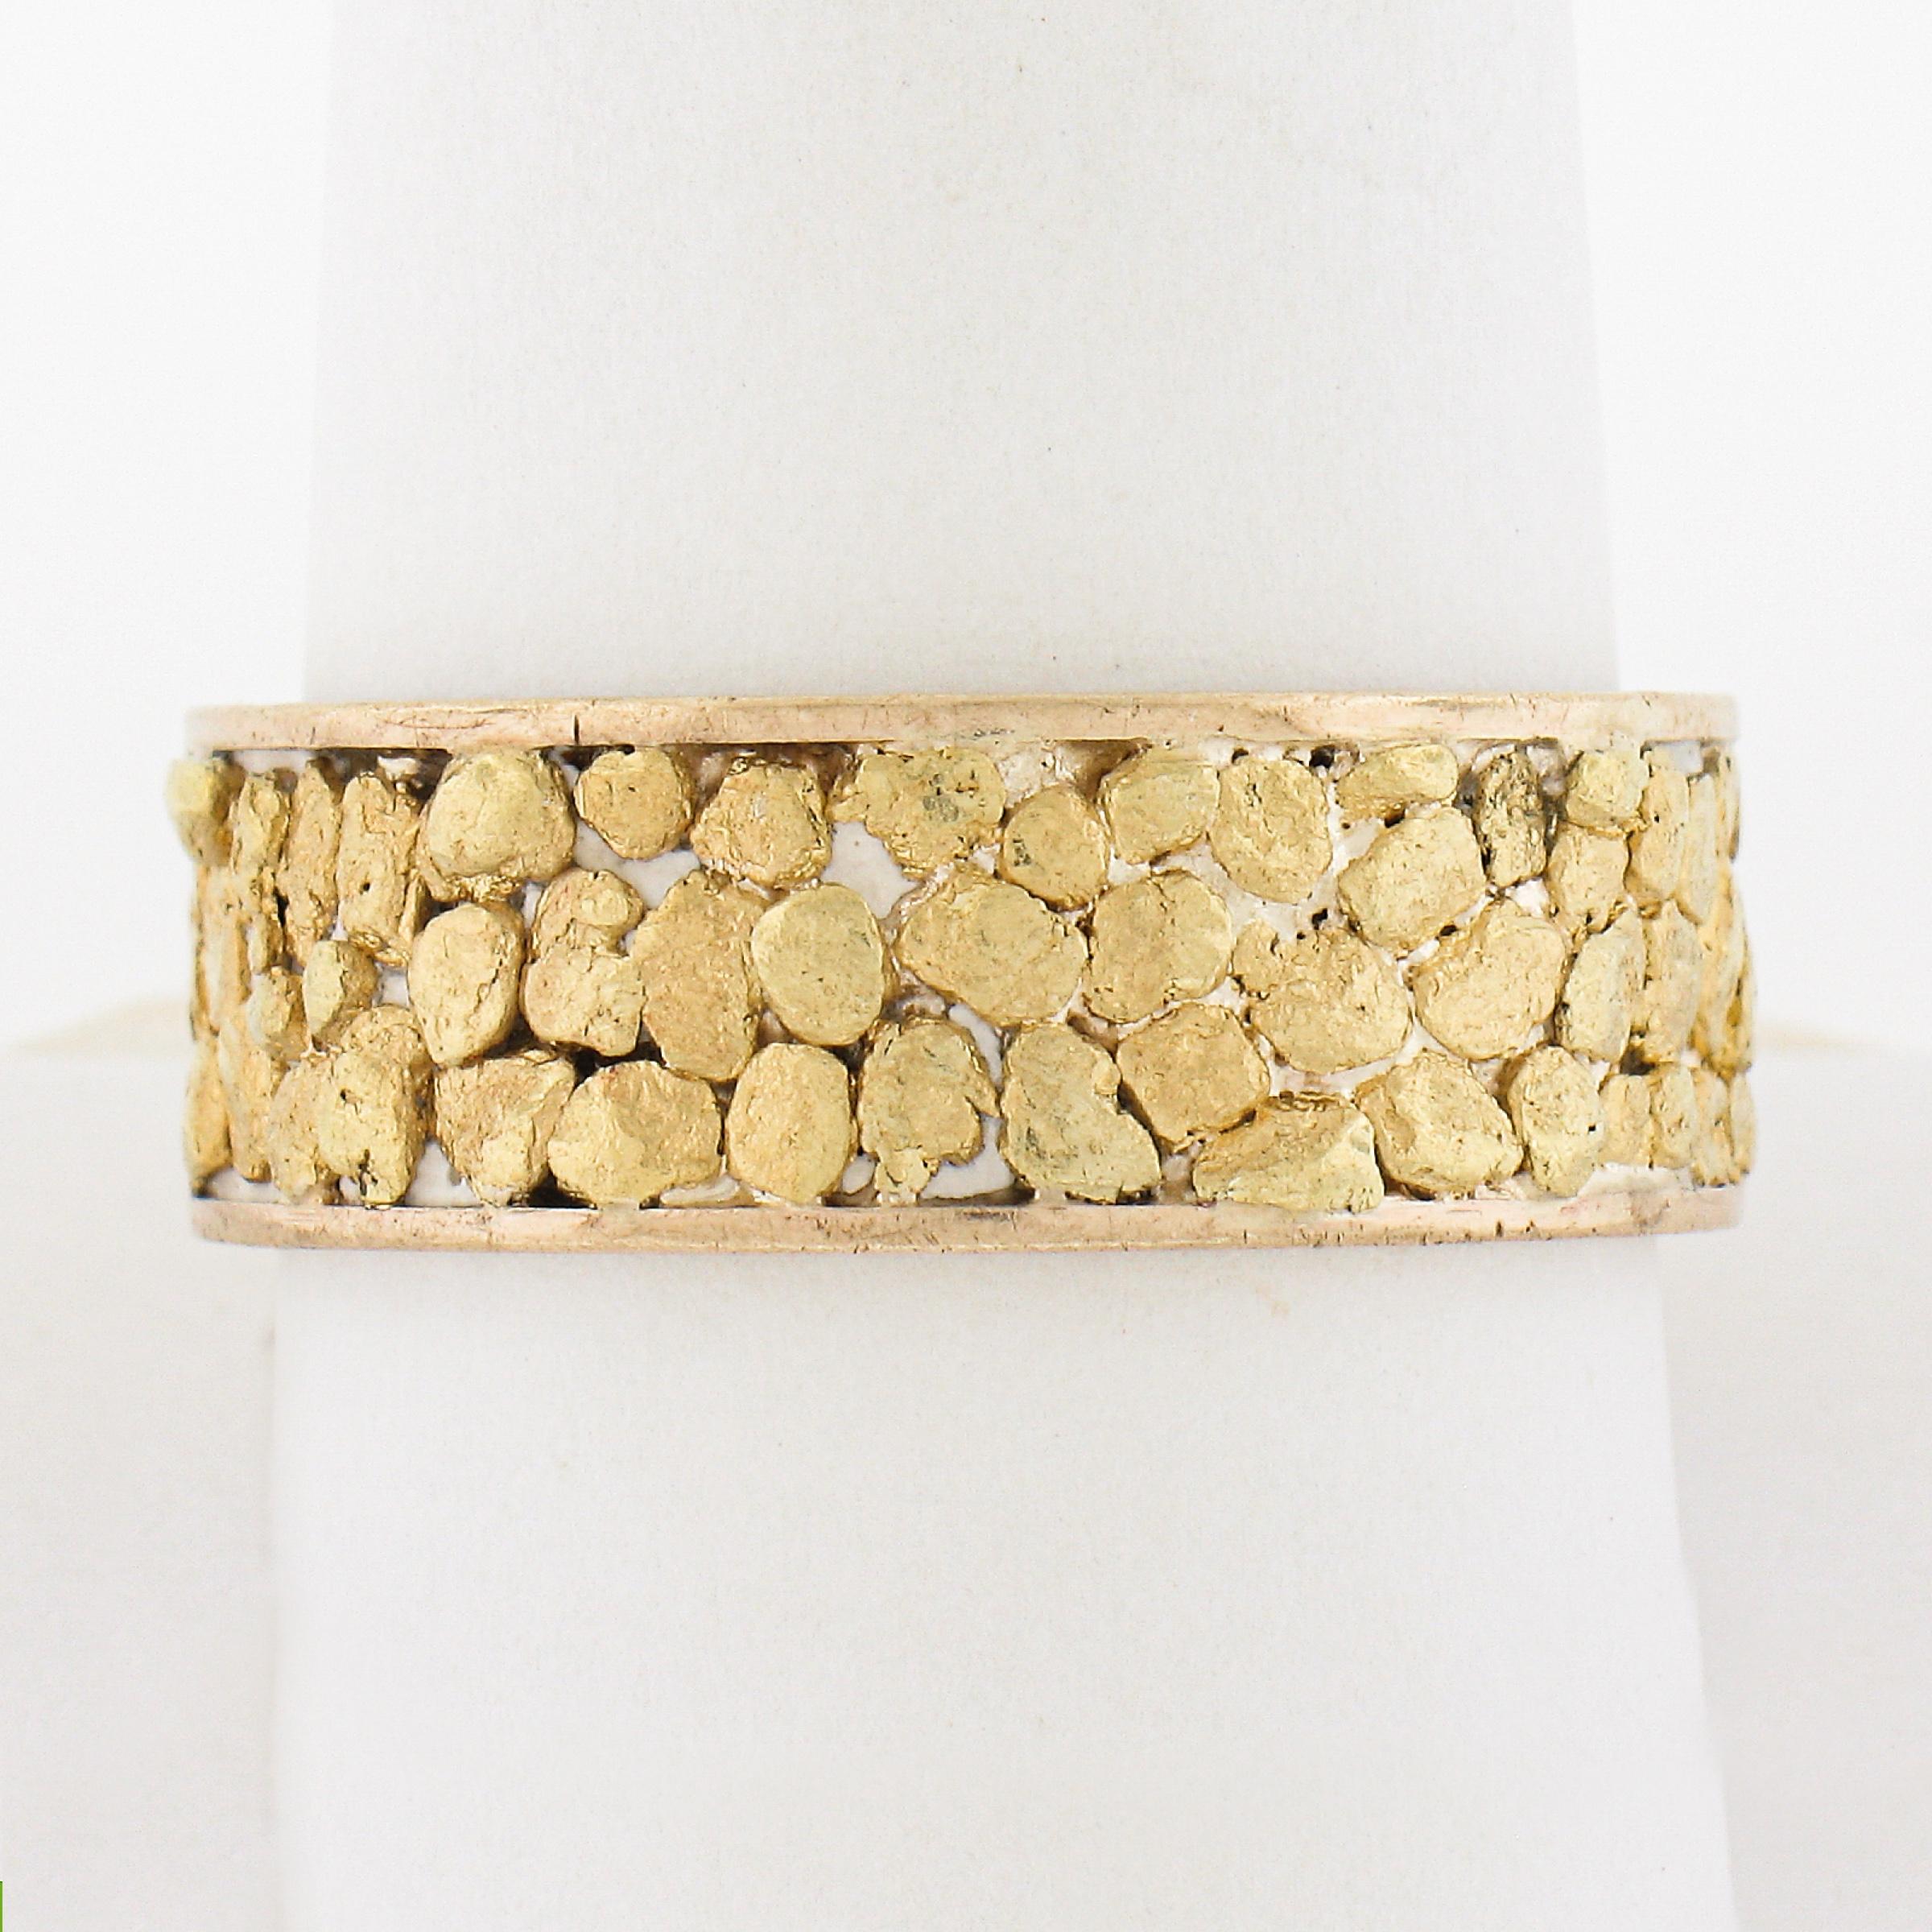 These are actual nuggets on the band and have some of the stone in between. They test 18k+ the nuggets. Unique band! Enjoy!

Material: Solid 18k Yellow Gold  
Weight: 8.59 Grams
Ring Size: 10.5 (We CANNOT custom size this ring.)
Ring Width: 7.9mm